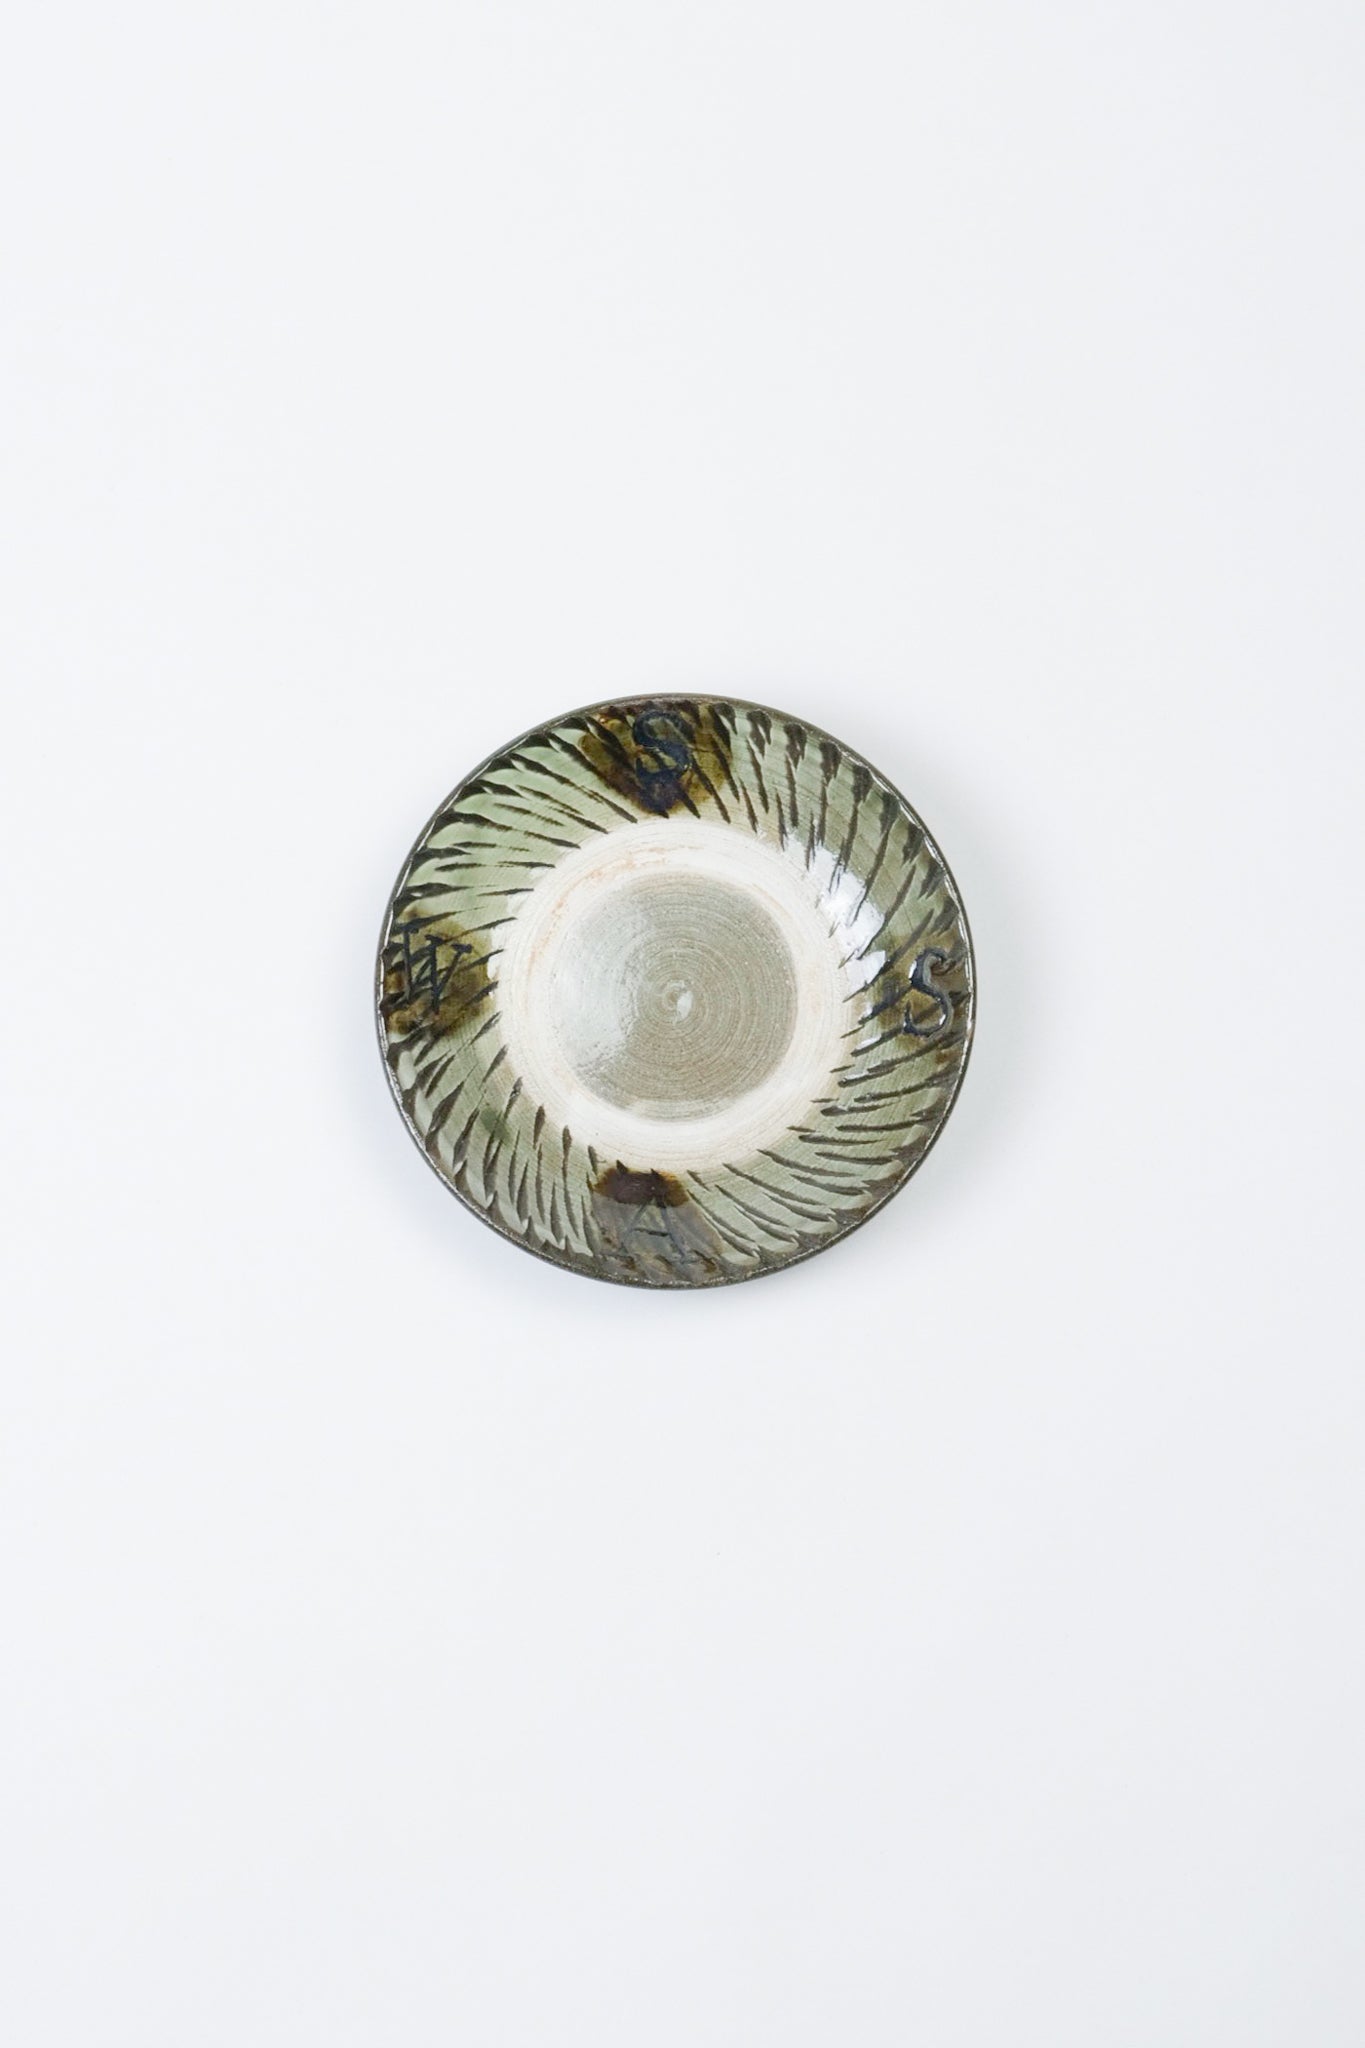 NOMA td "Small Plate by Onta / 봄 여름 가을 겨울"